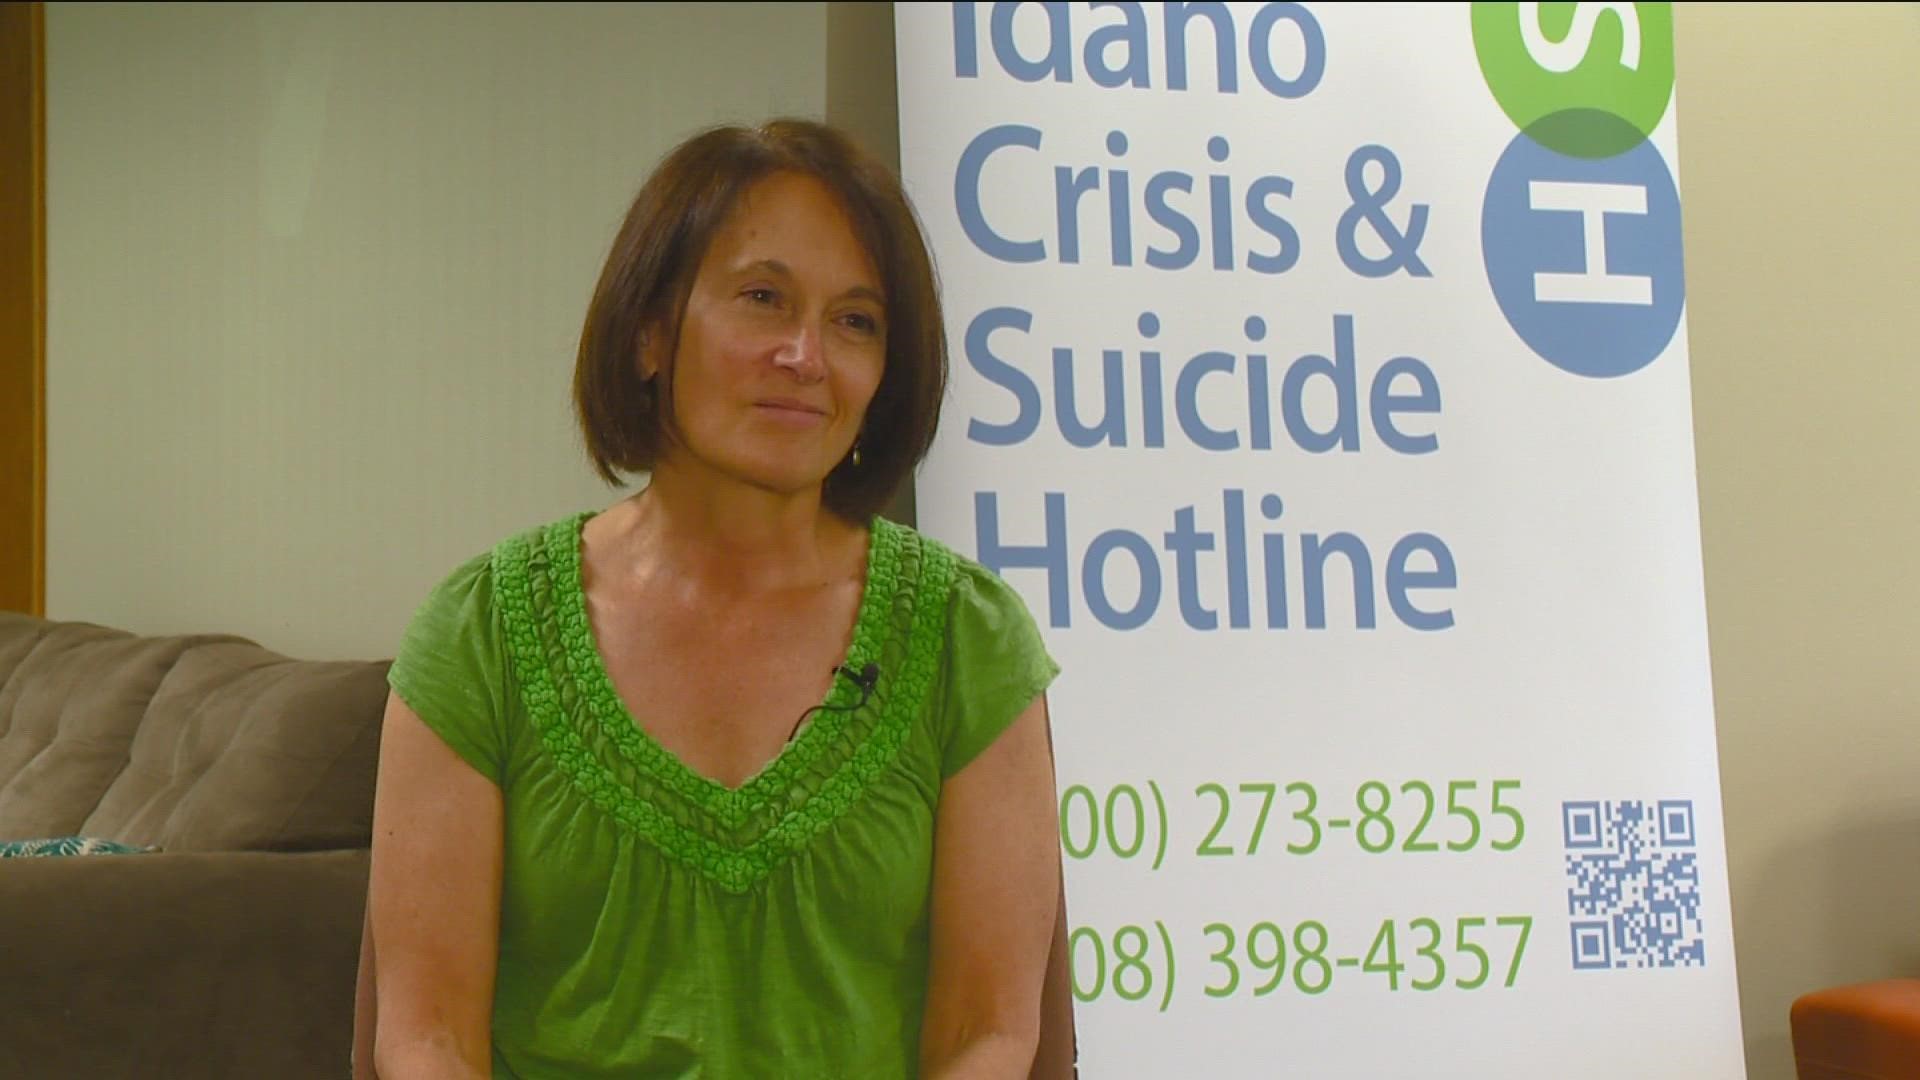 This three-digit number will make it easier for people under emotional distress to get help, according to Idaho Crisis and Suicide Hotline Director, Lee Flinn.